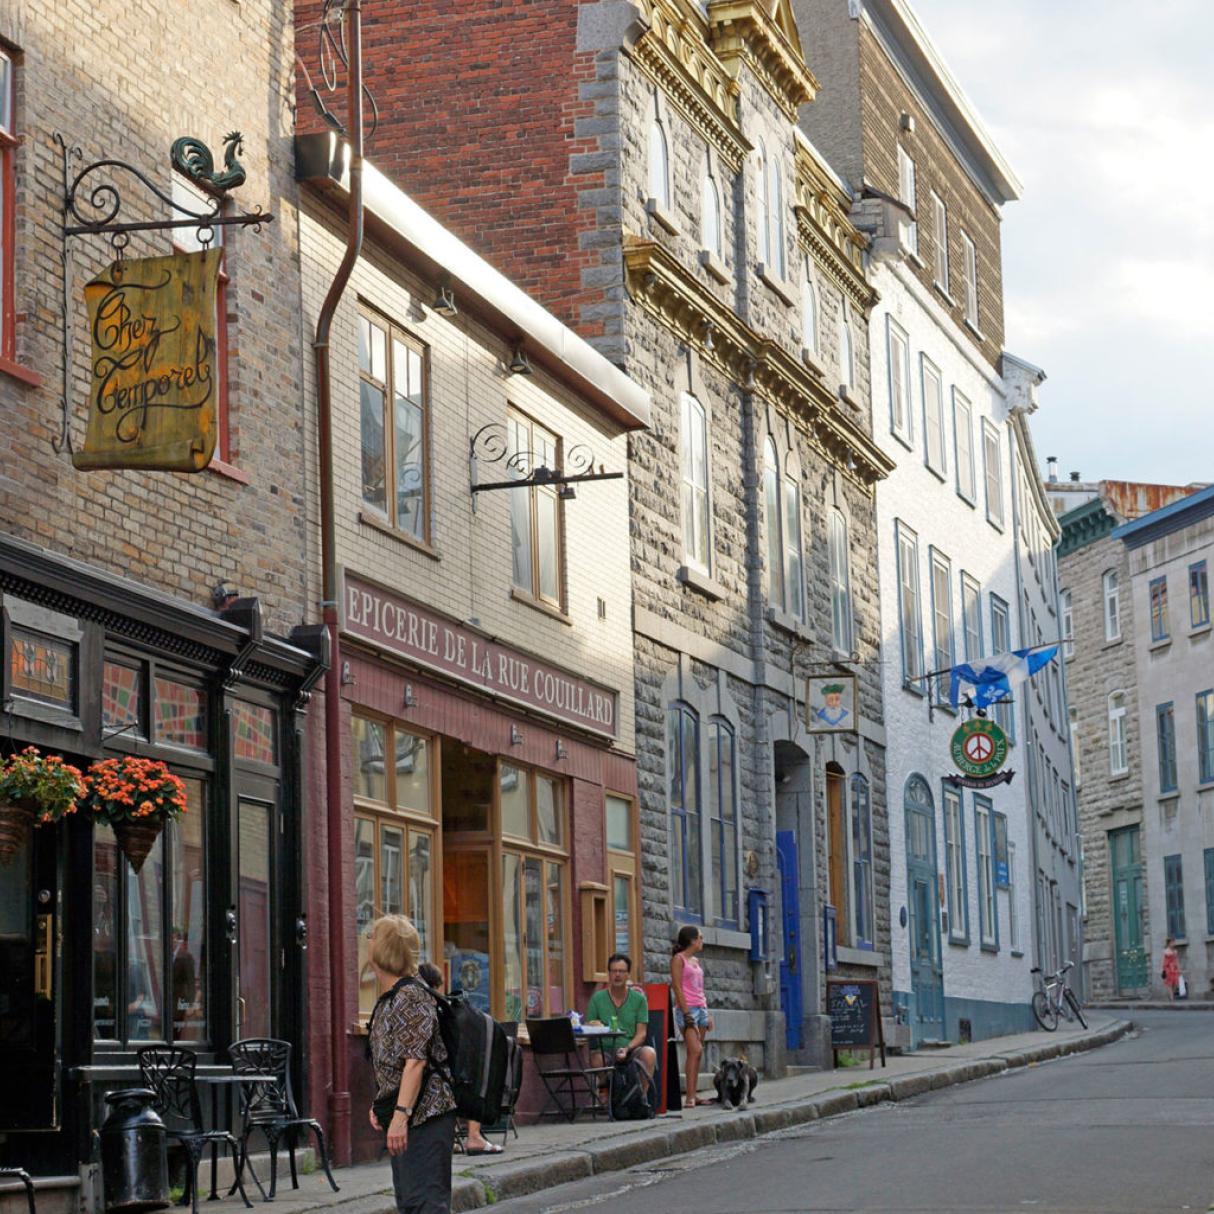 People walk along the street in Quebec City